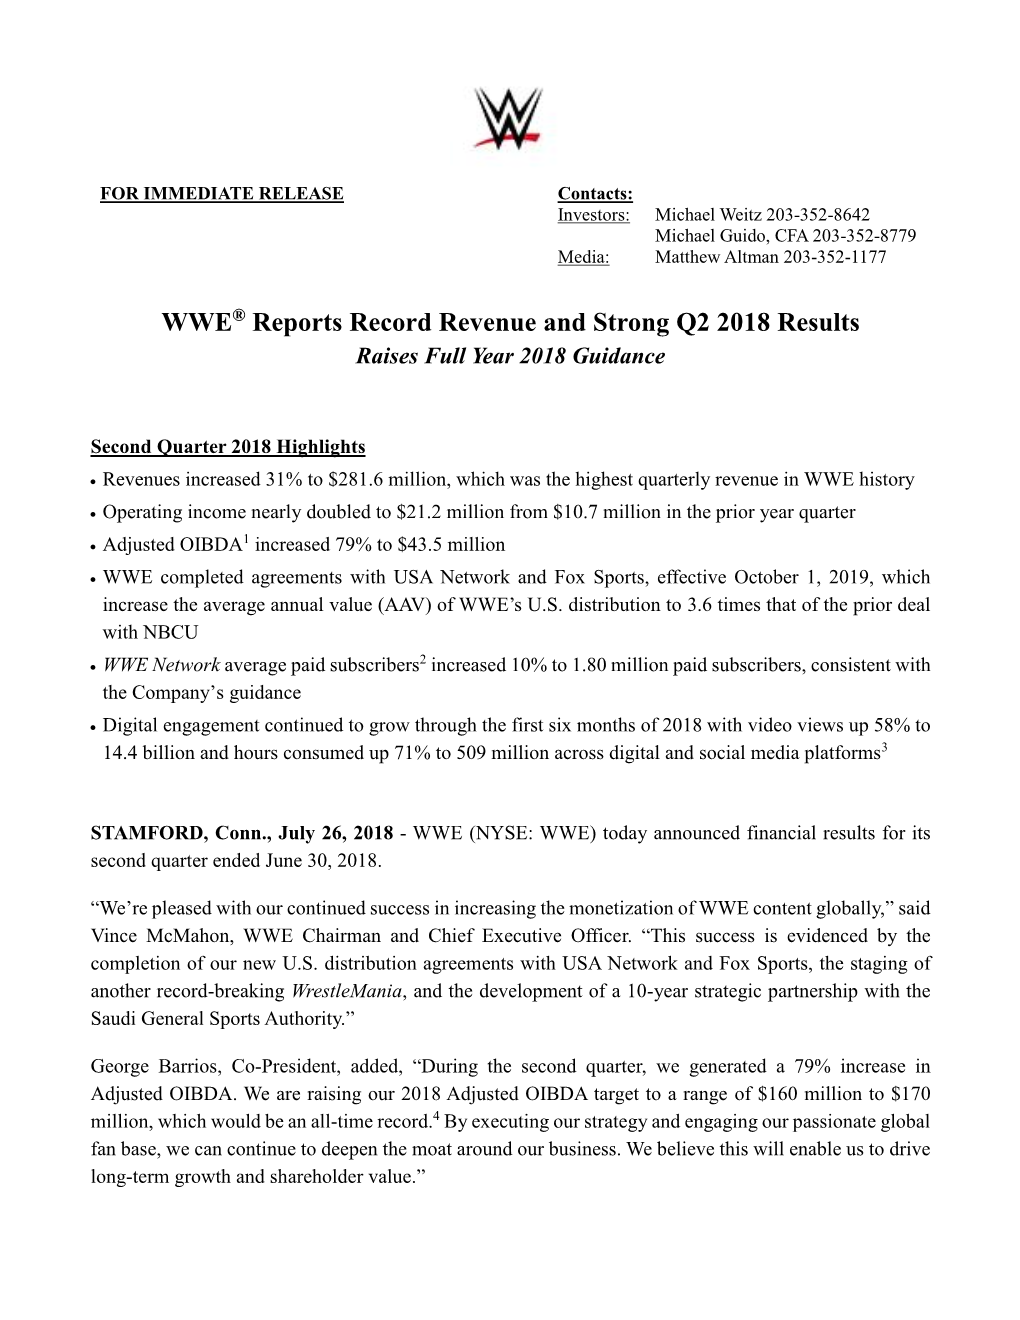 WWE® Reports Record Revenue and Strong Q2 2018 Results Raises Full Year 2018 Guidance